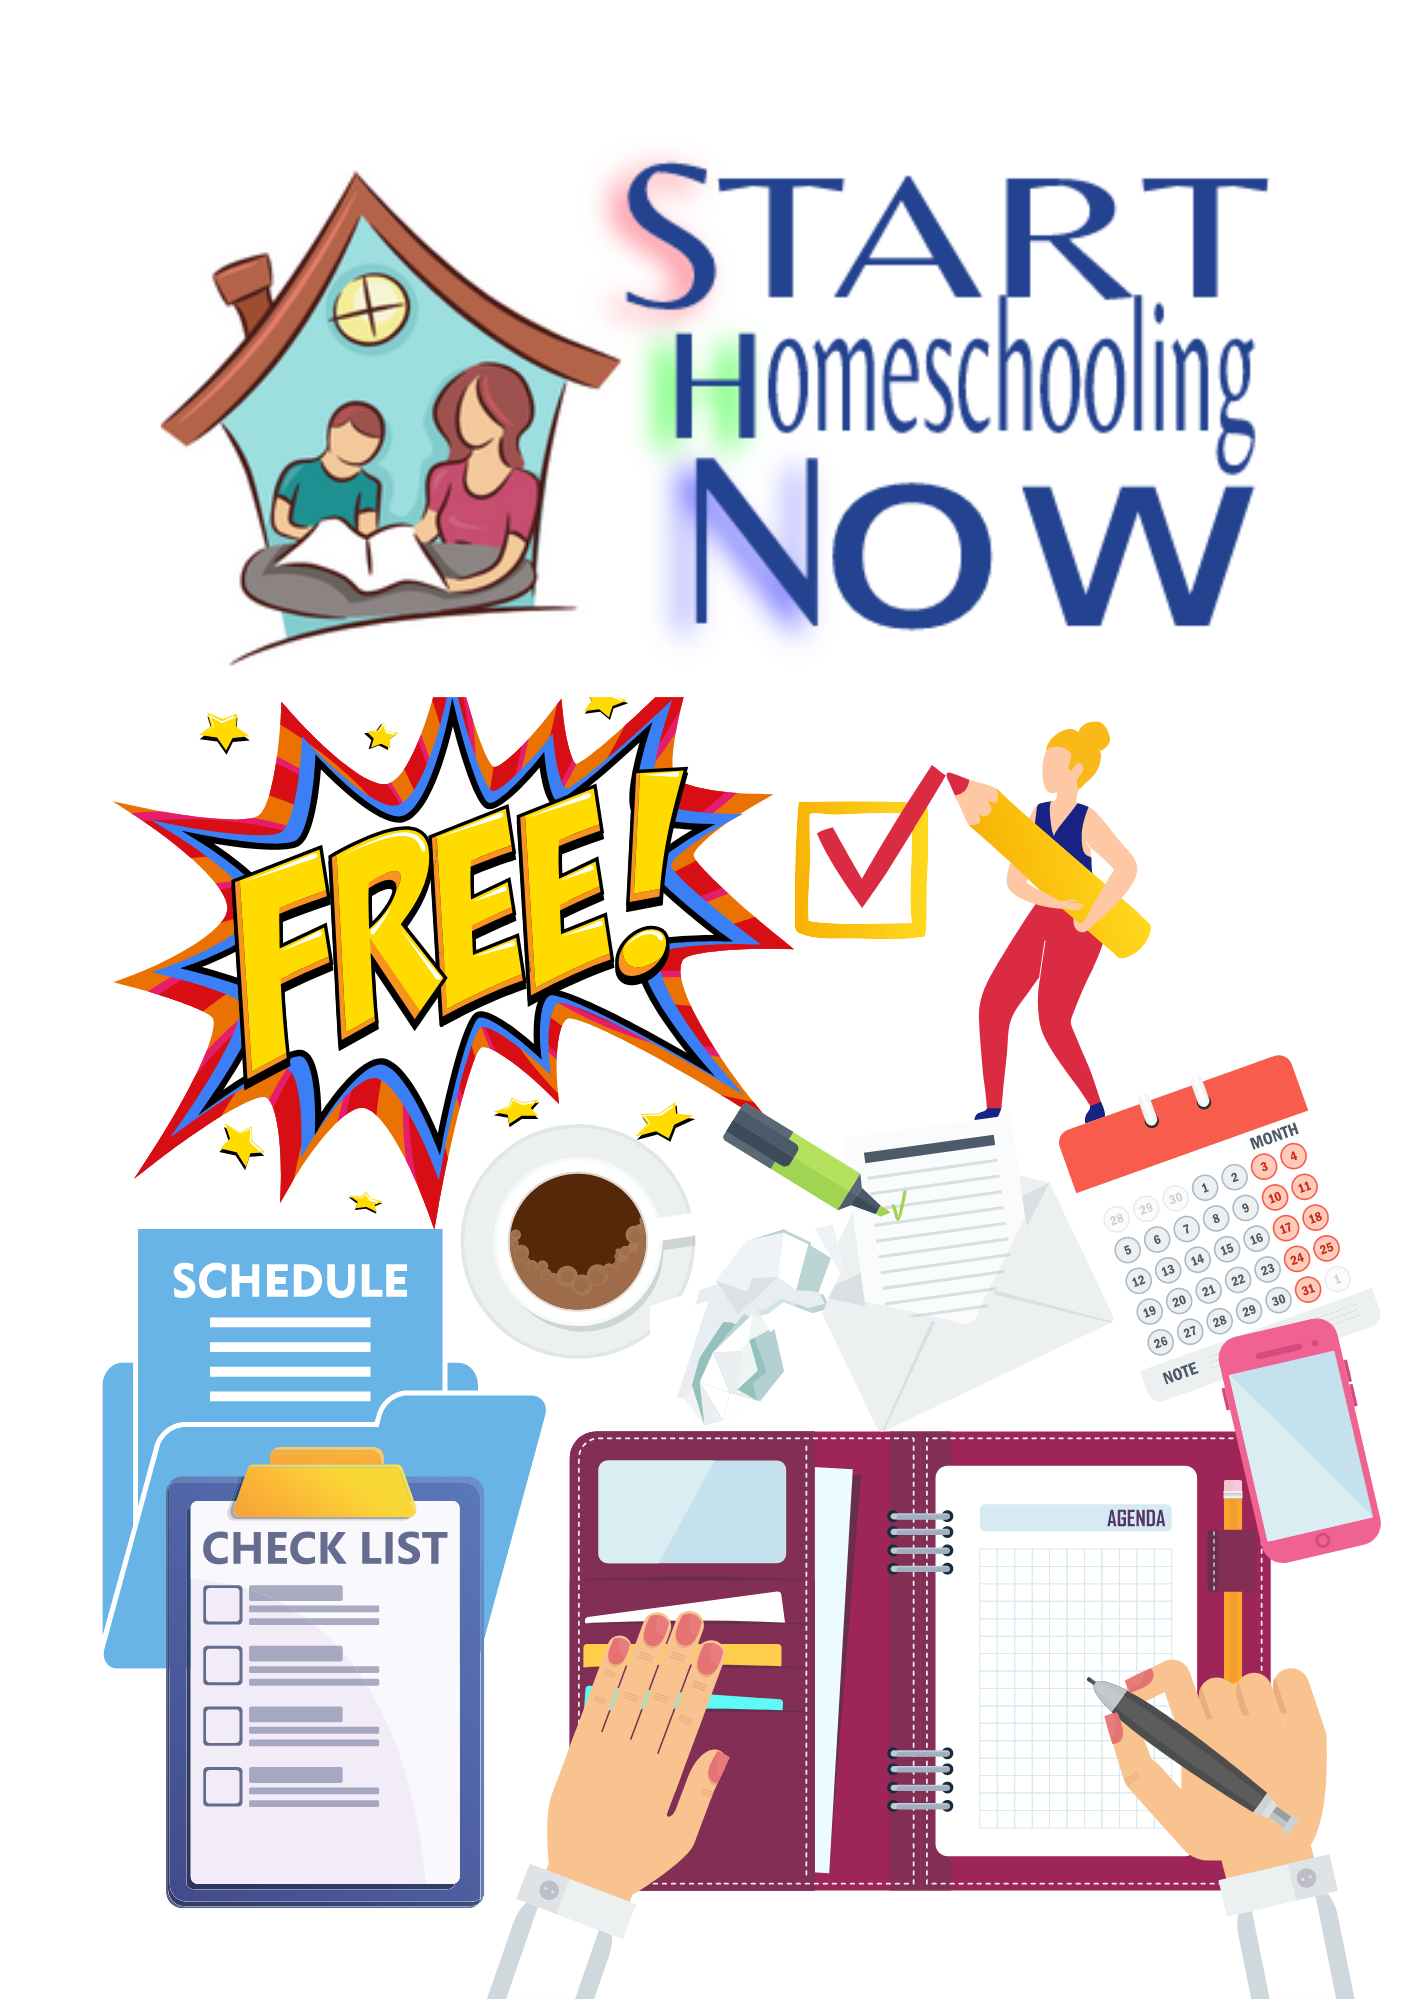 Printable Daily Routine Homeschool Schedule